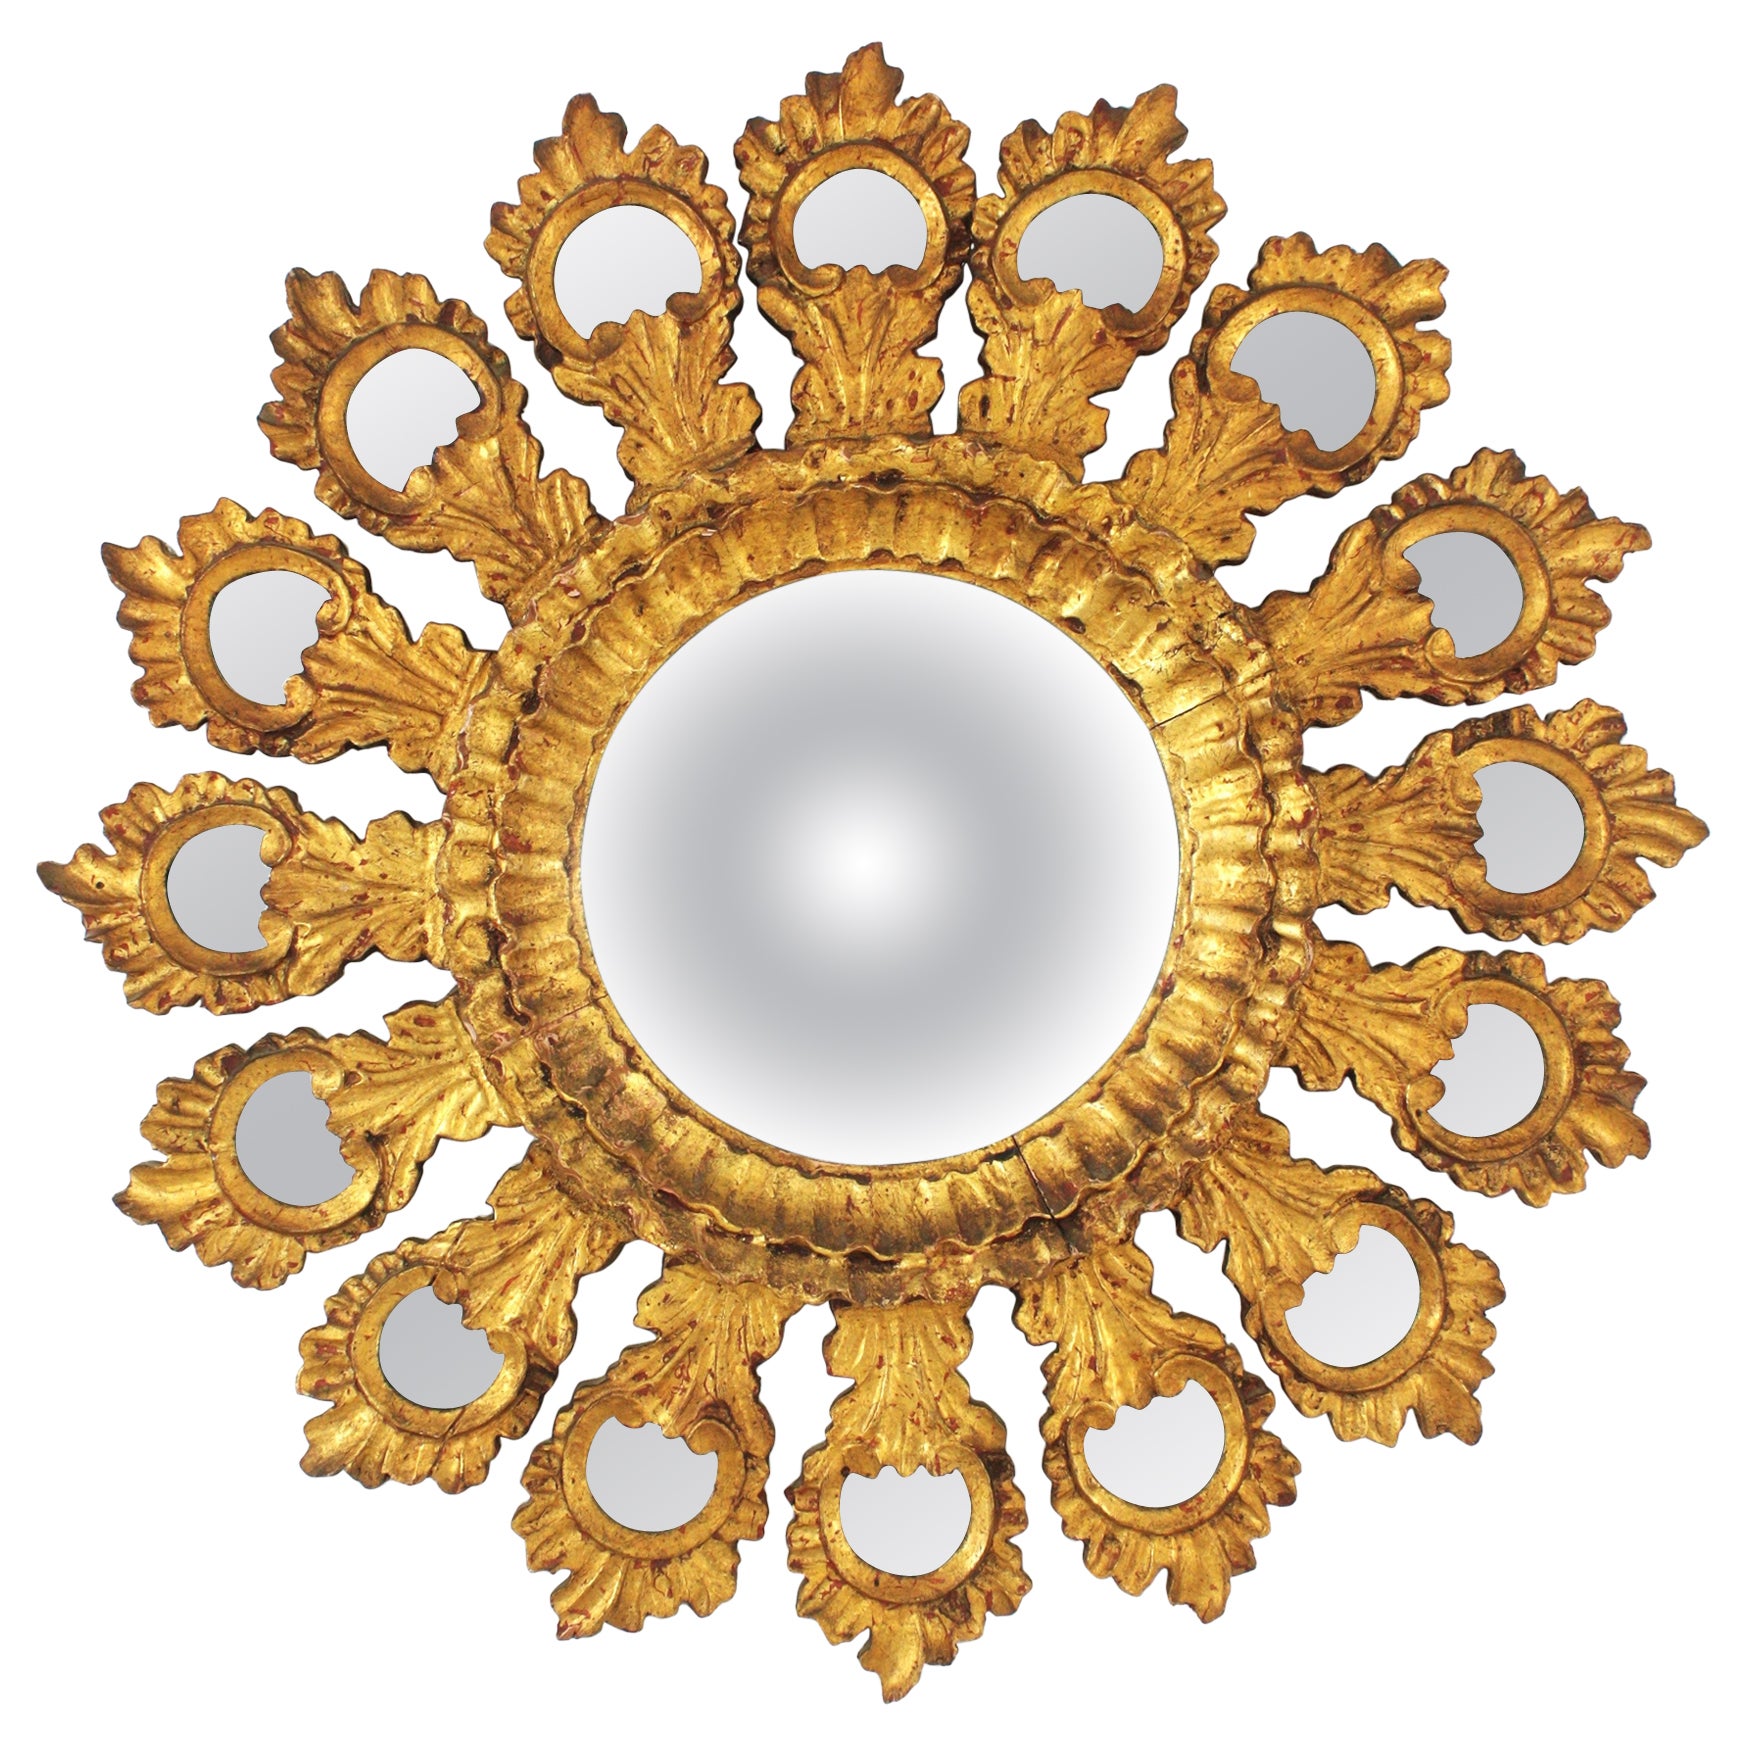 Spanish Baroque Sunburst Gilt Carved Wood Bullseye Mirror with Mirror Insets For Sale